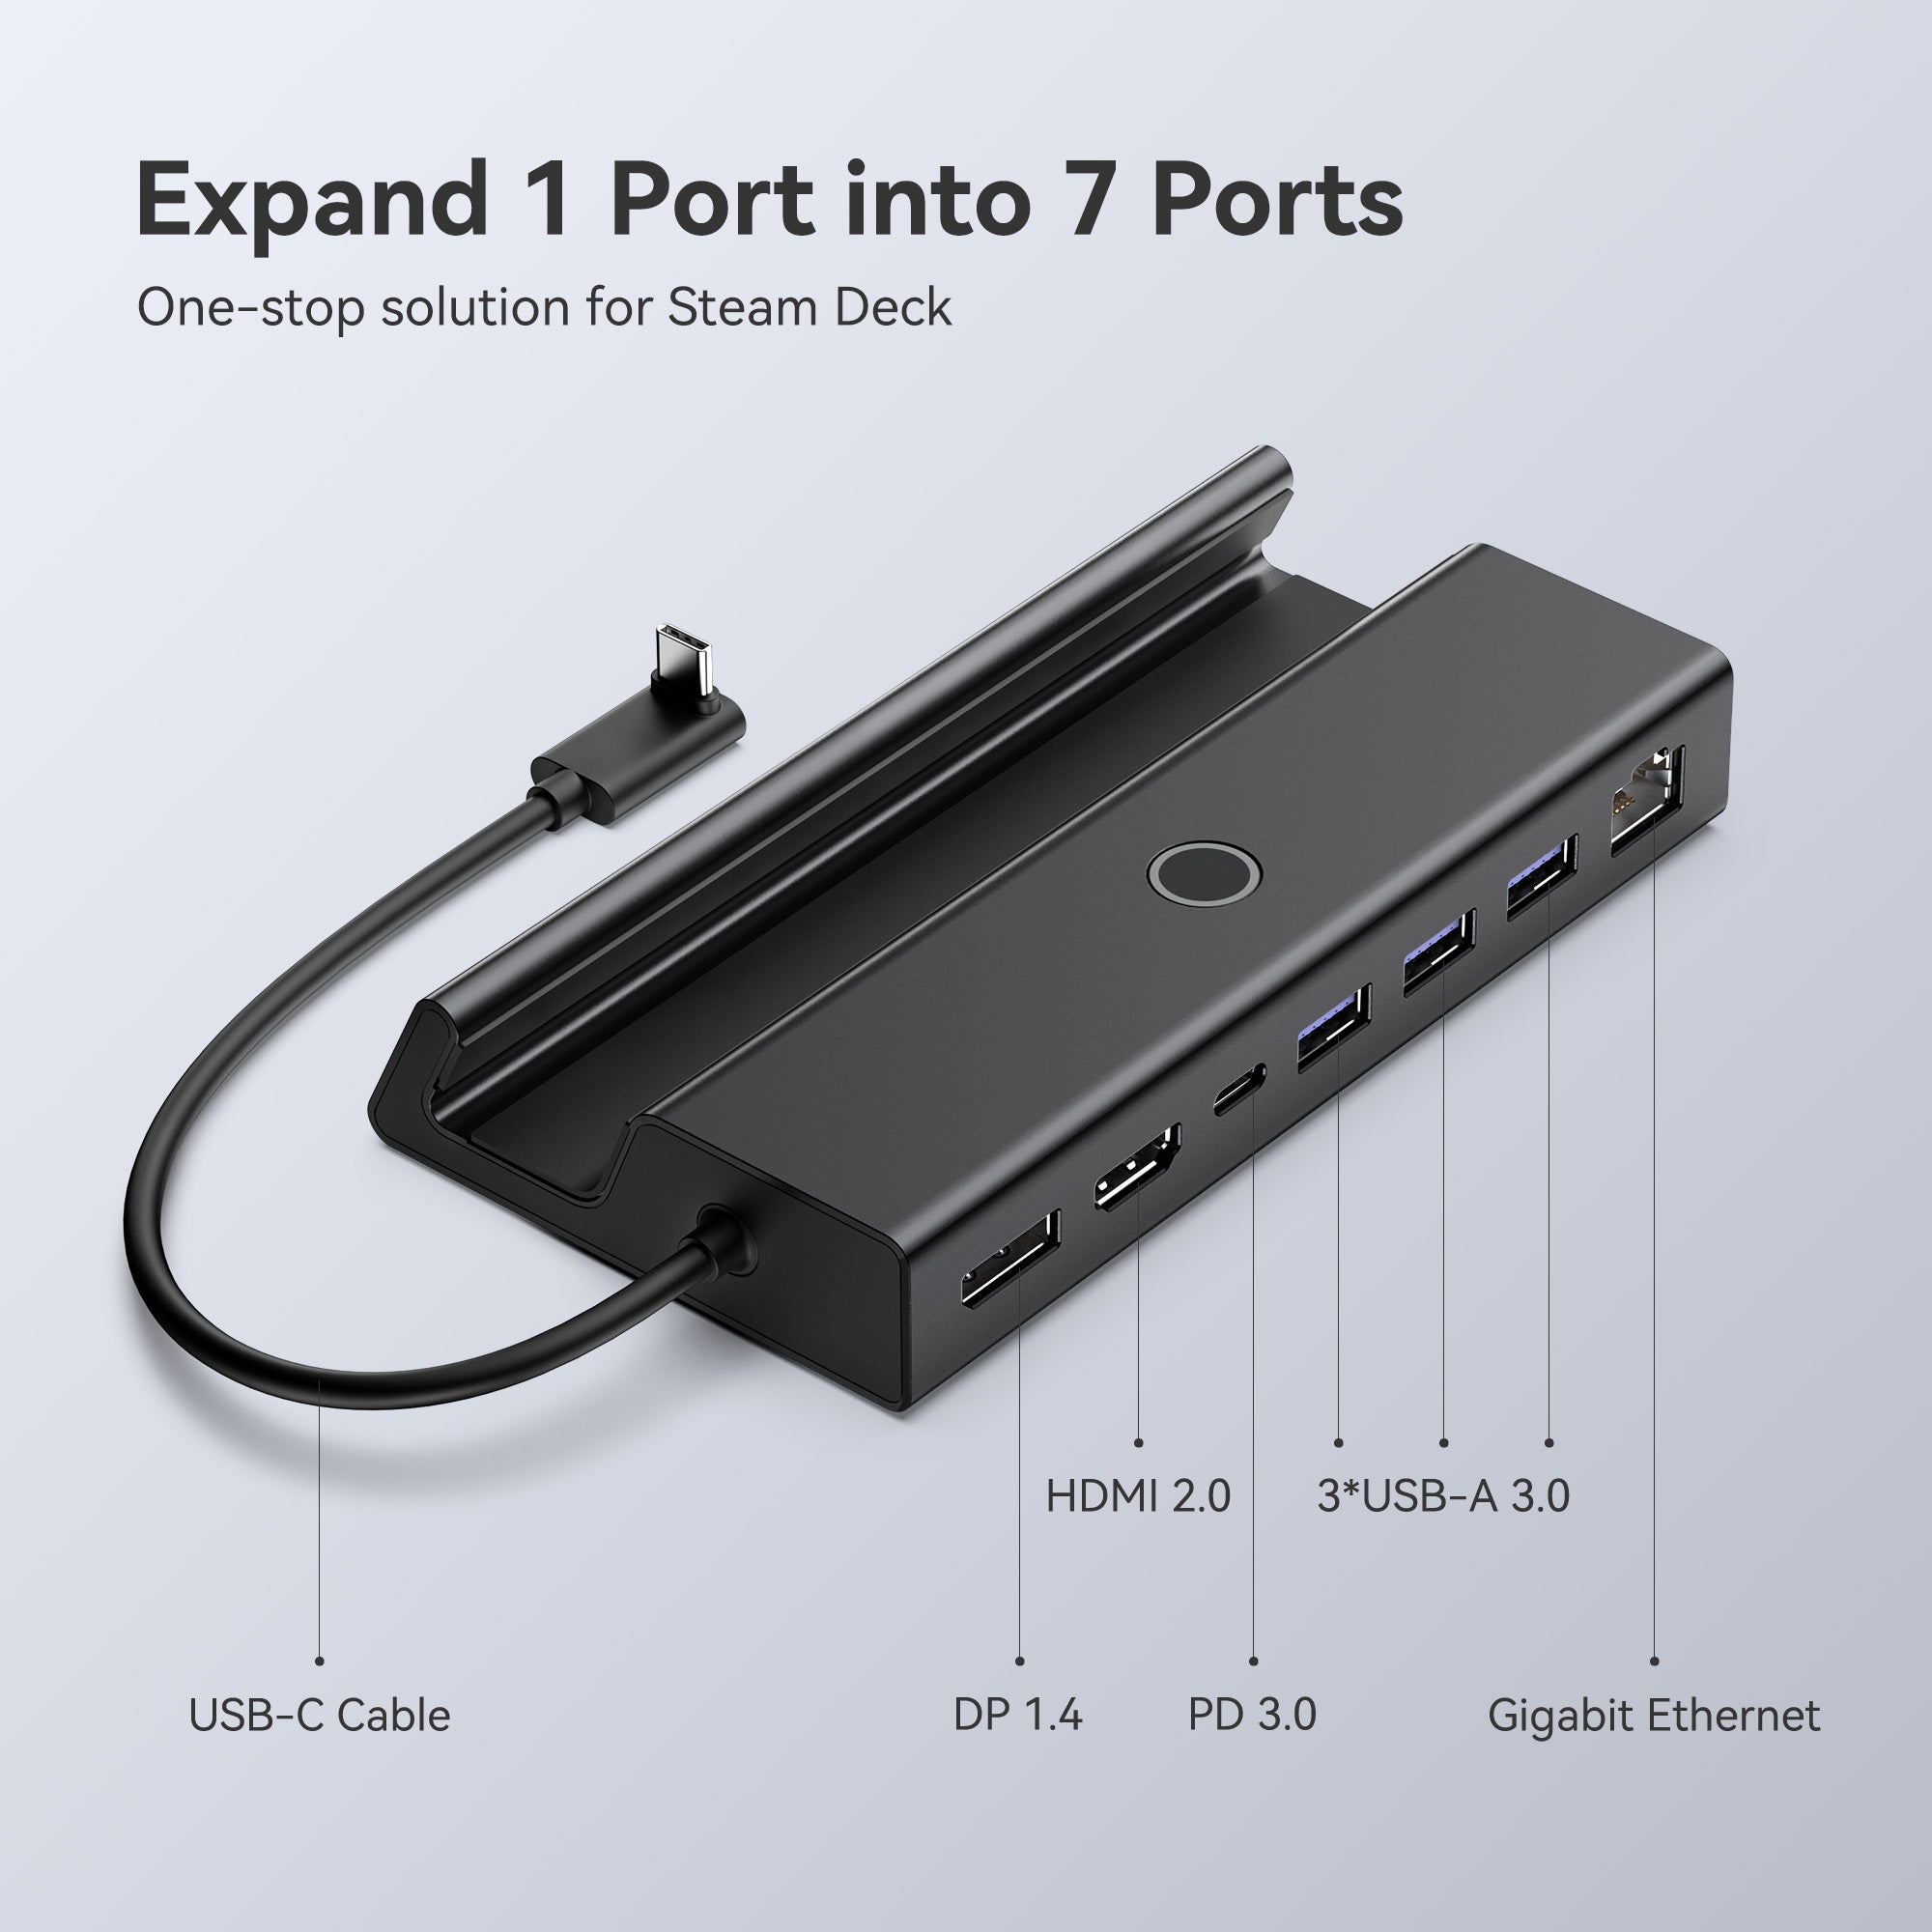 Portable Steam Deck/Steam Deck OLED Dock, 4-in-1 Docking Station with HDMI  2.0 4K@60Hz, 2 USB-A 2.0 for Keyboard, Mouse and Handle, PD in 100W Max